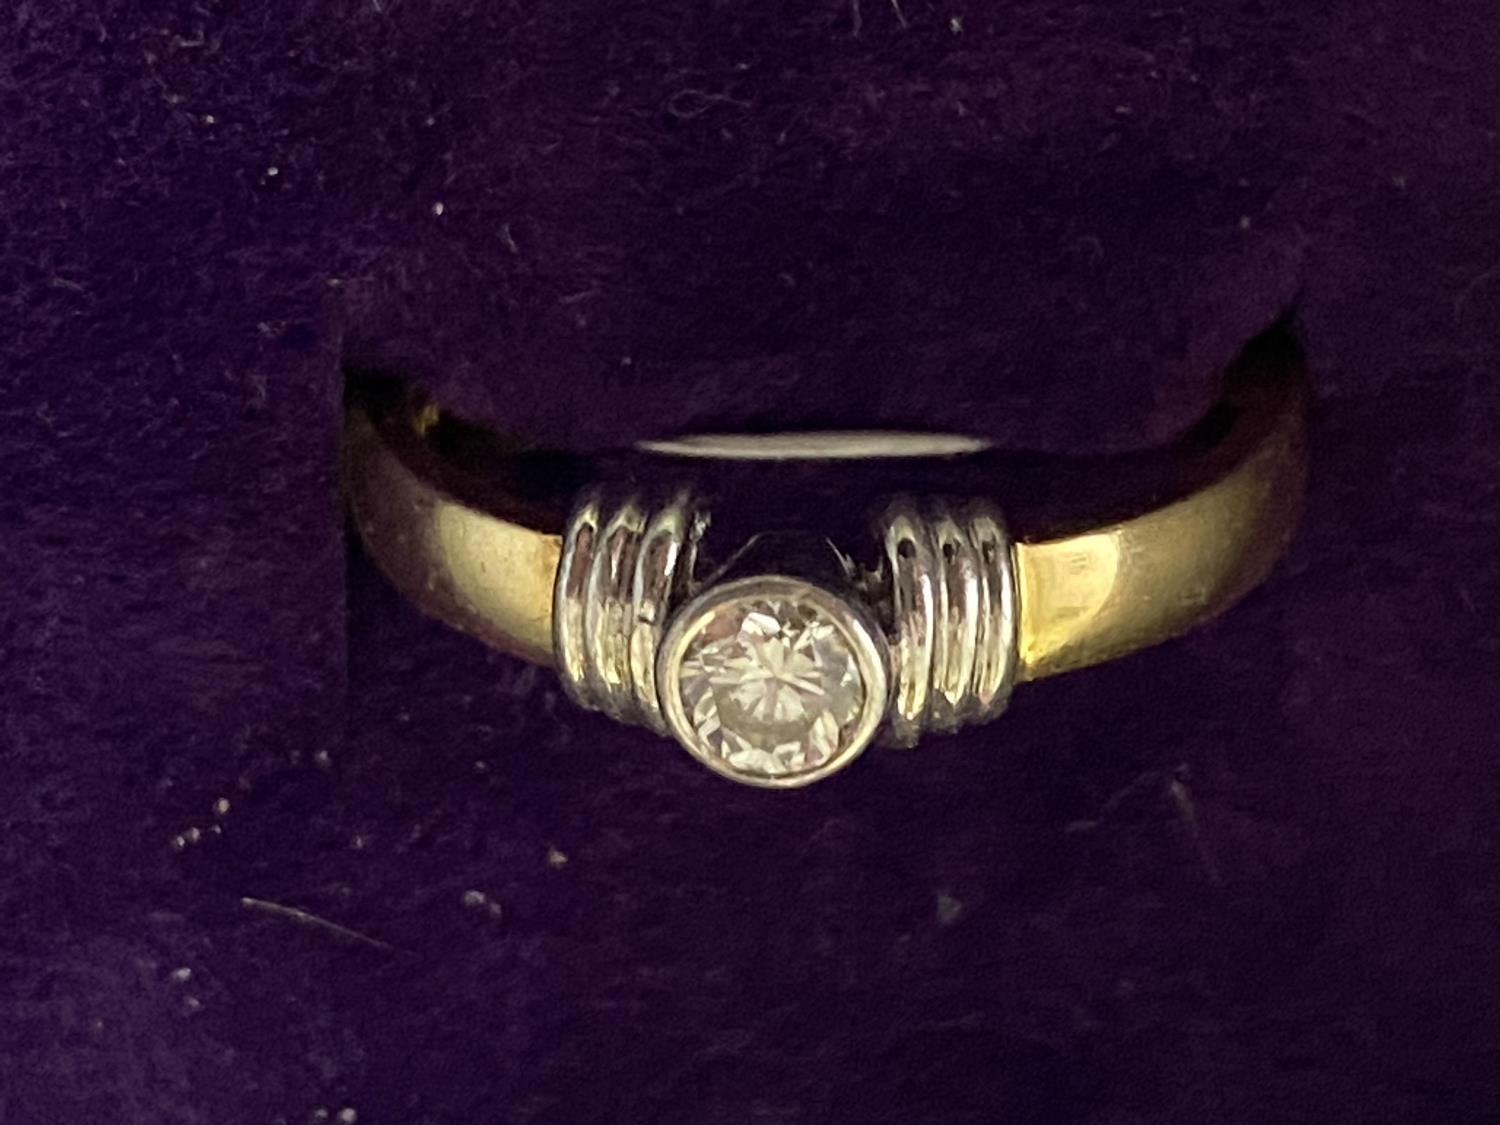 AN 18 CARAT YELLOW GOLD RING WITH CENTRE ROUND CUT DIAMOND. WEIGHT 4.7 GRAMS, RING SIZE N - Image 2 of 3